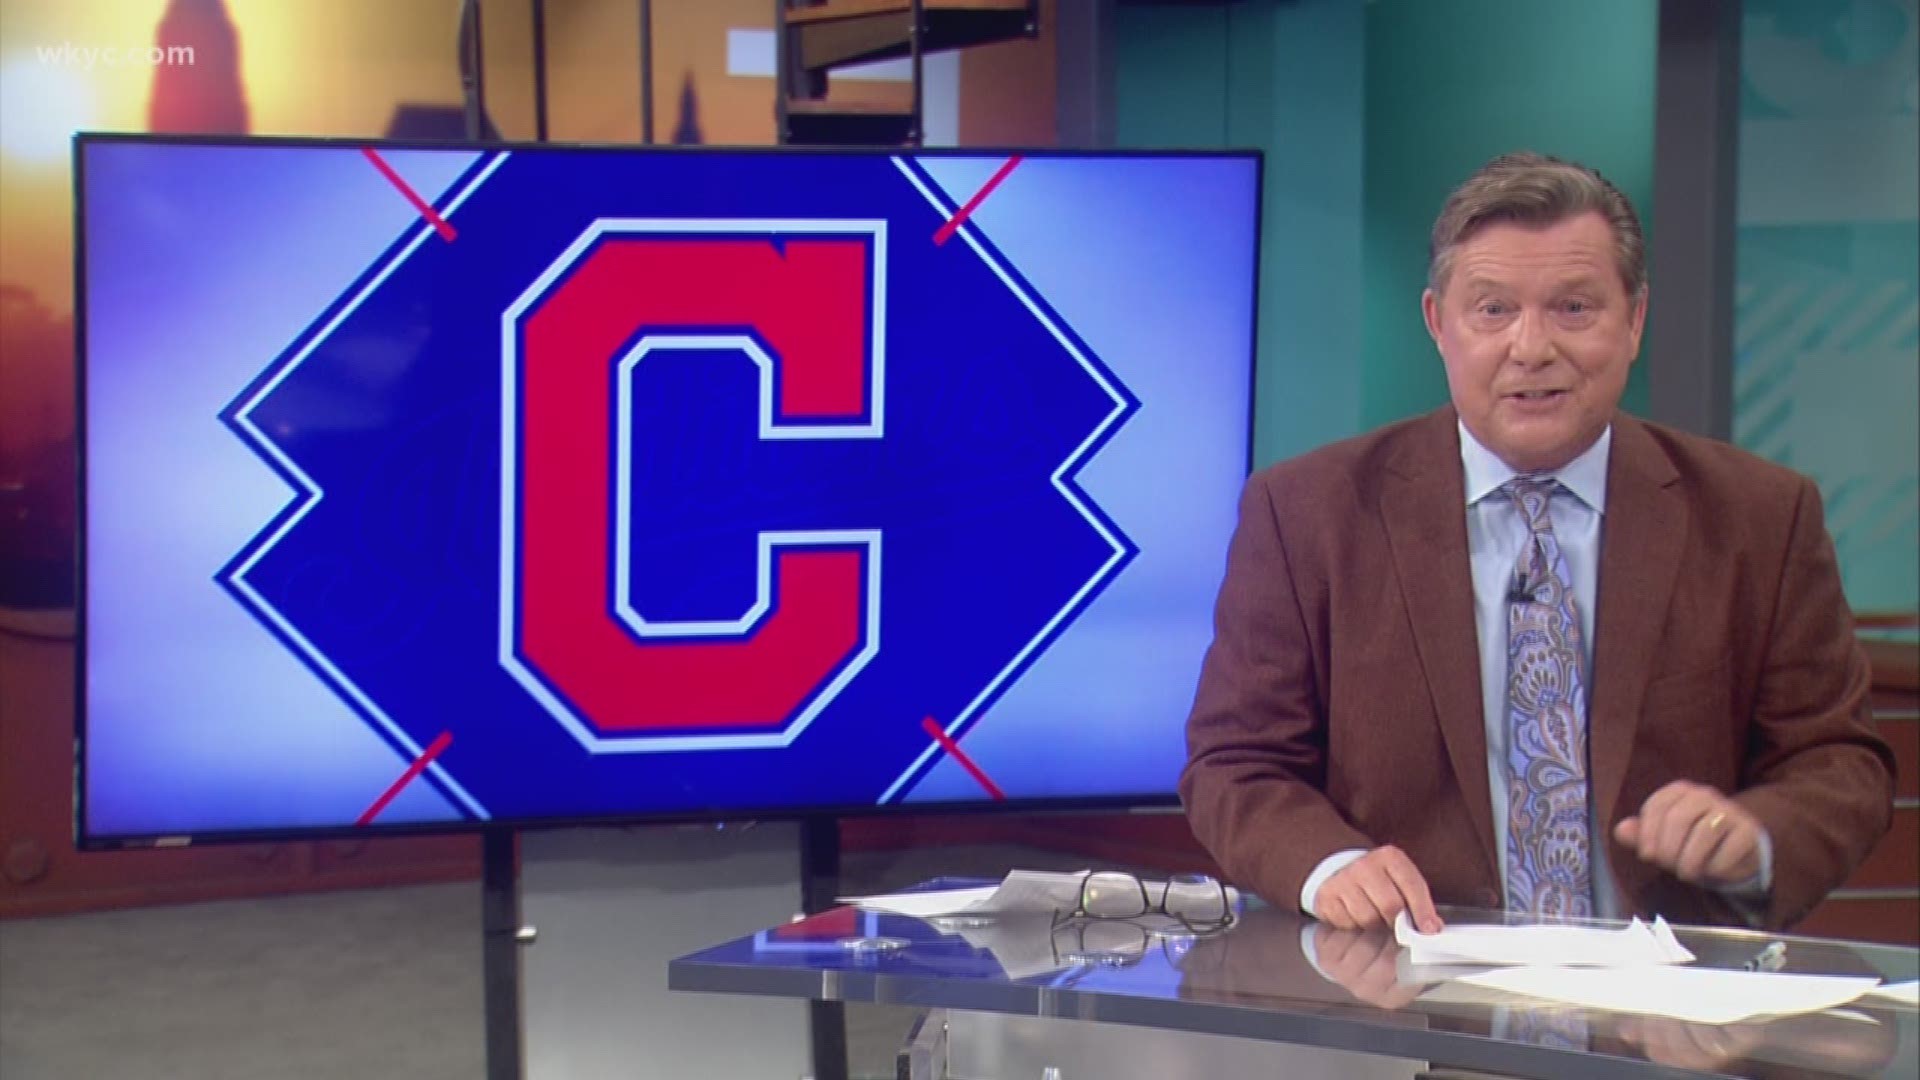 John Sherman, a KC native, has been an investor in the Tribe for the last three years. Details on the deal are not known at this time.